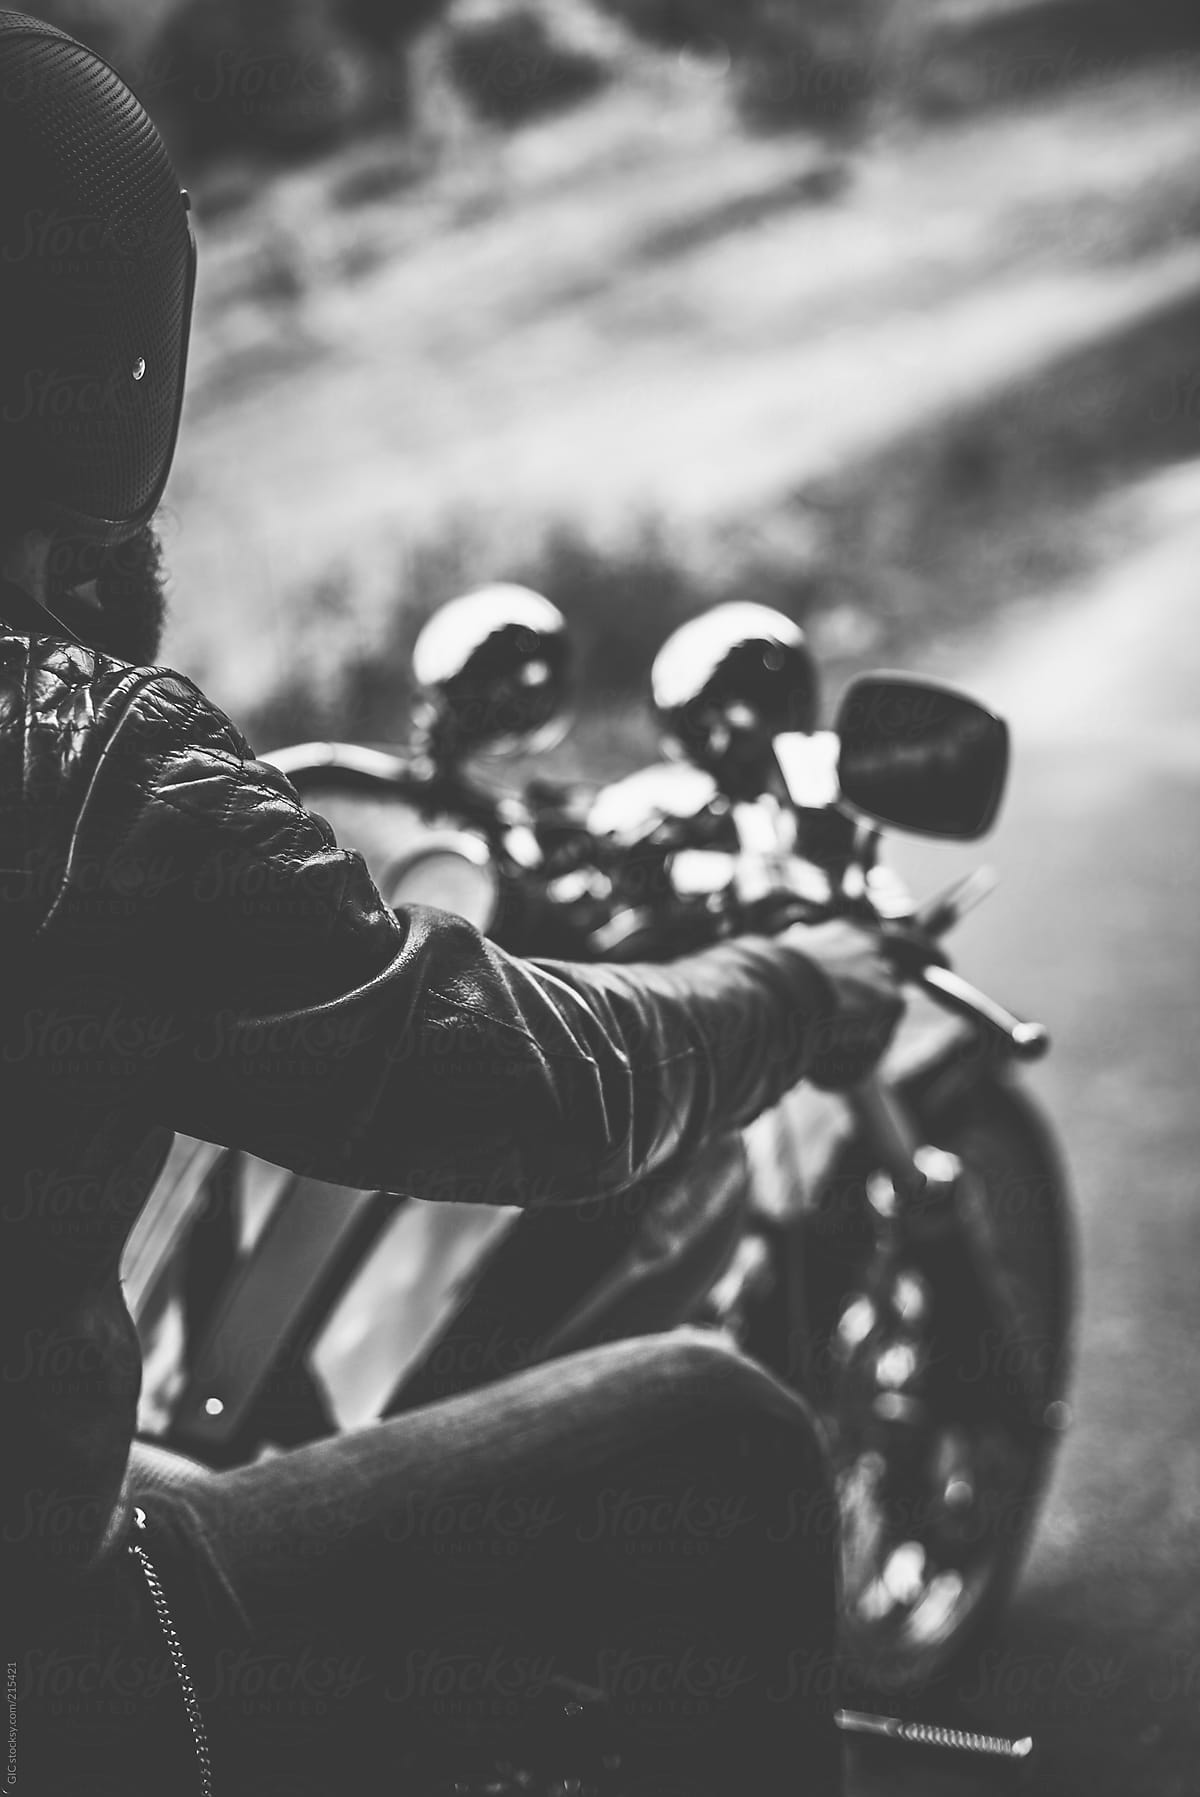 Young Motorcyclist Riding His Bike | Stocksy United